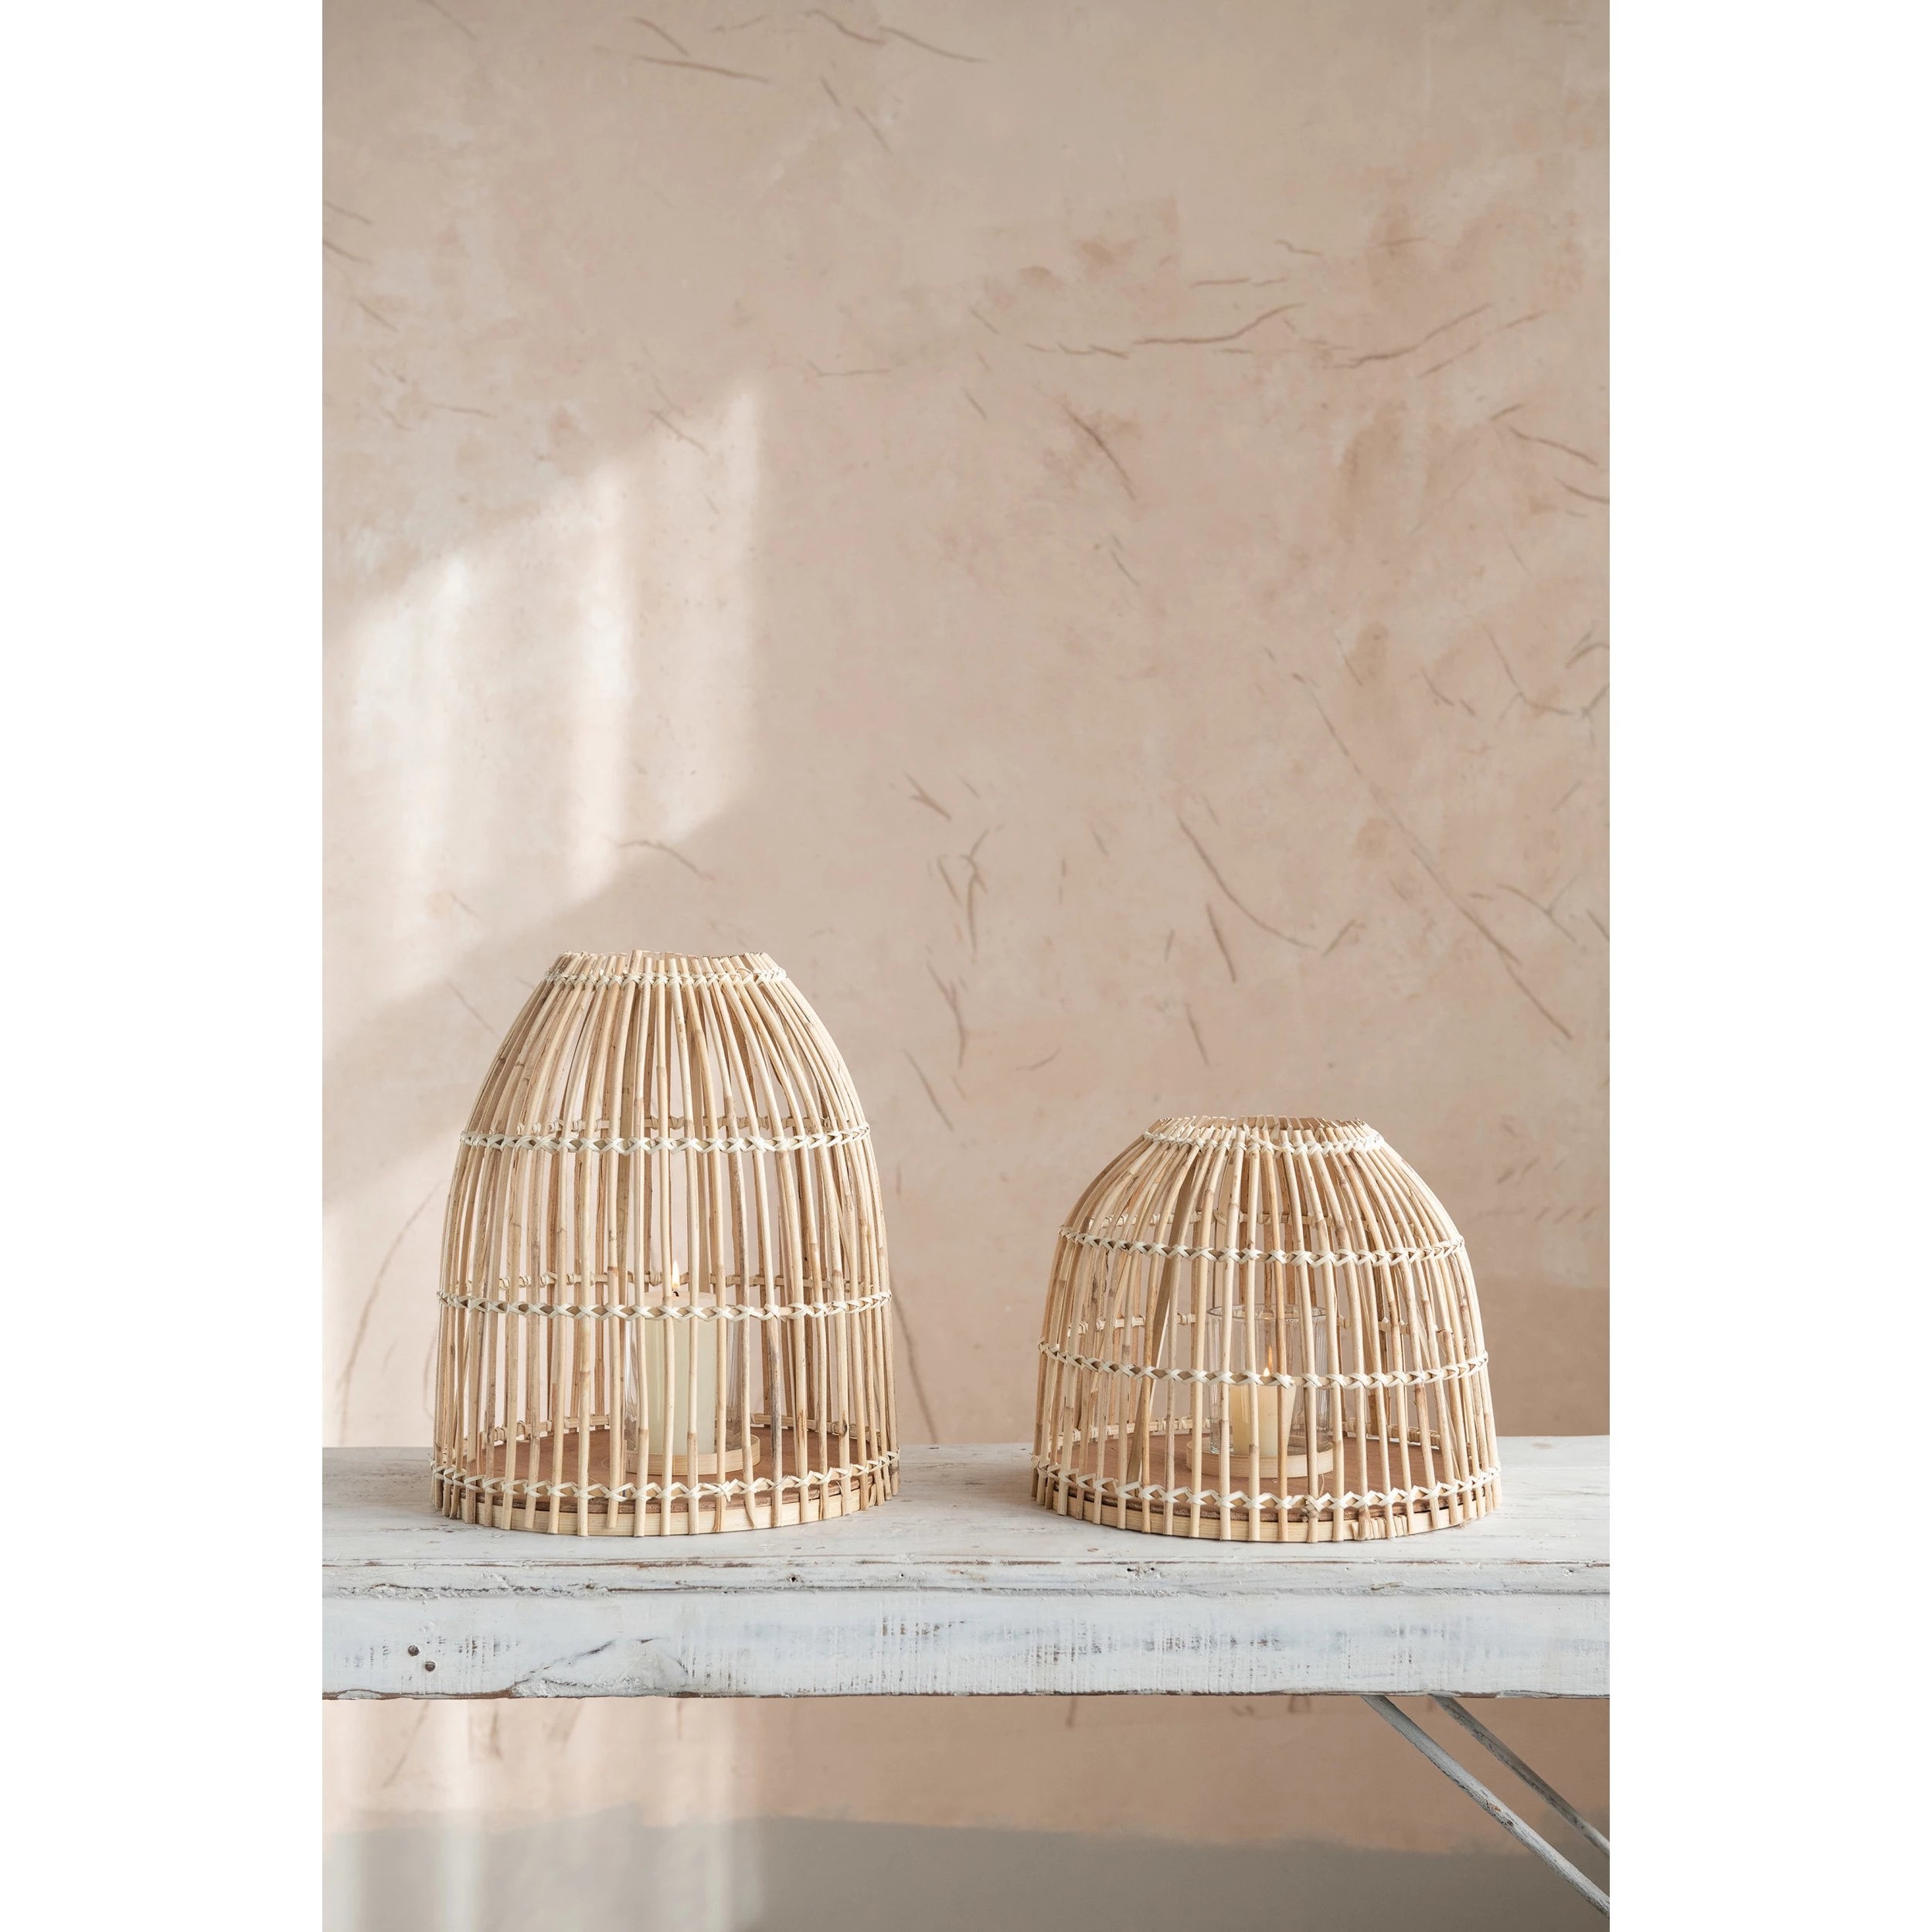 Bamboo Lanterns with Glass Inserts, Set of 2 - Image 1